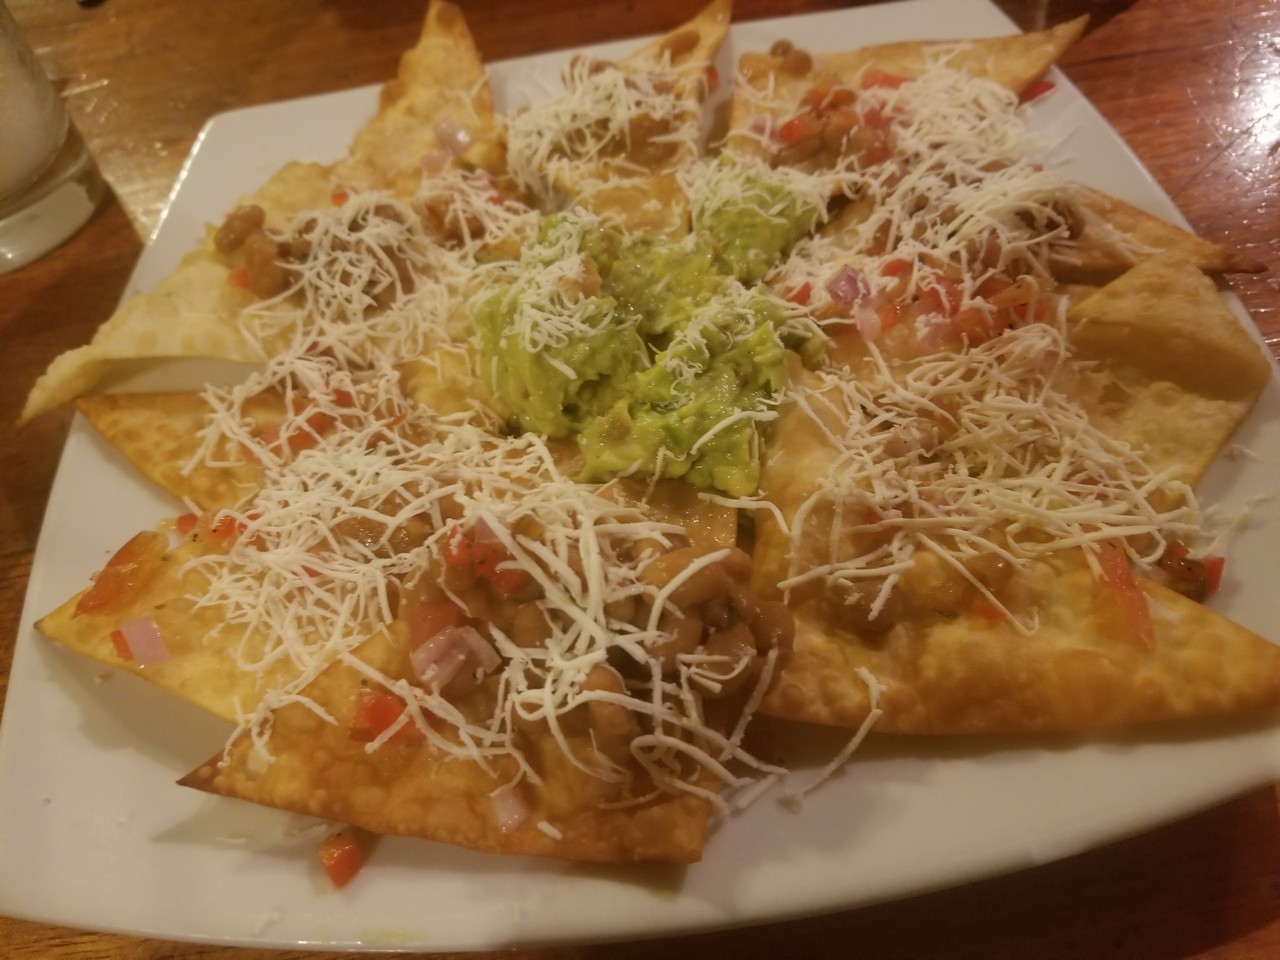 a plate of nachos with guacamole and cheese